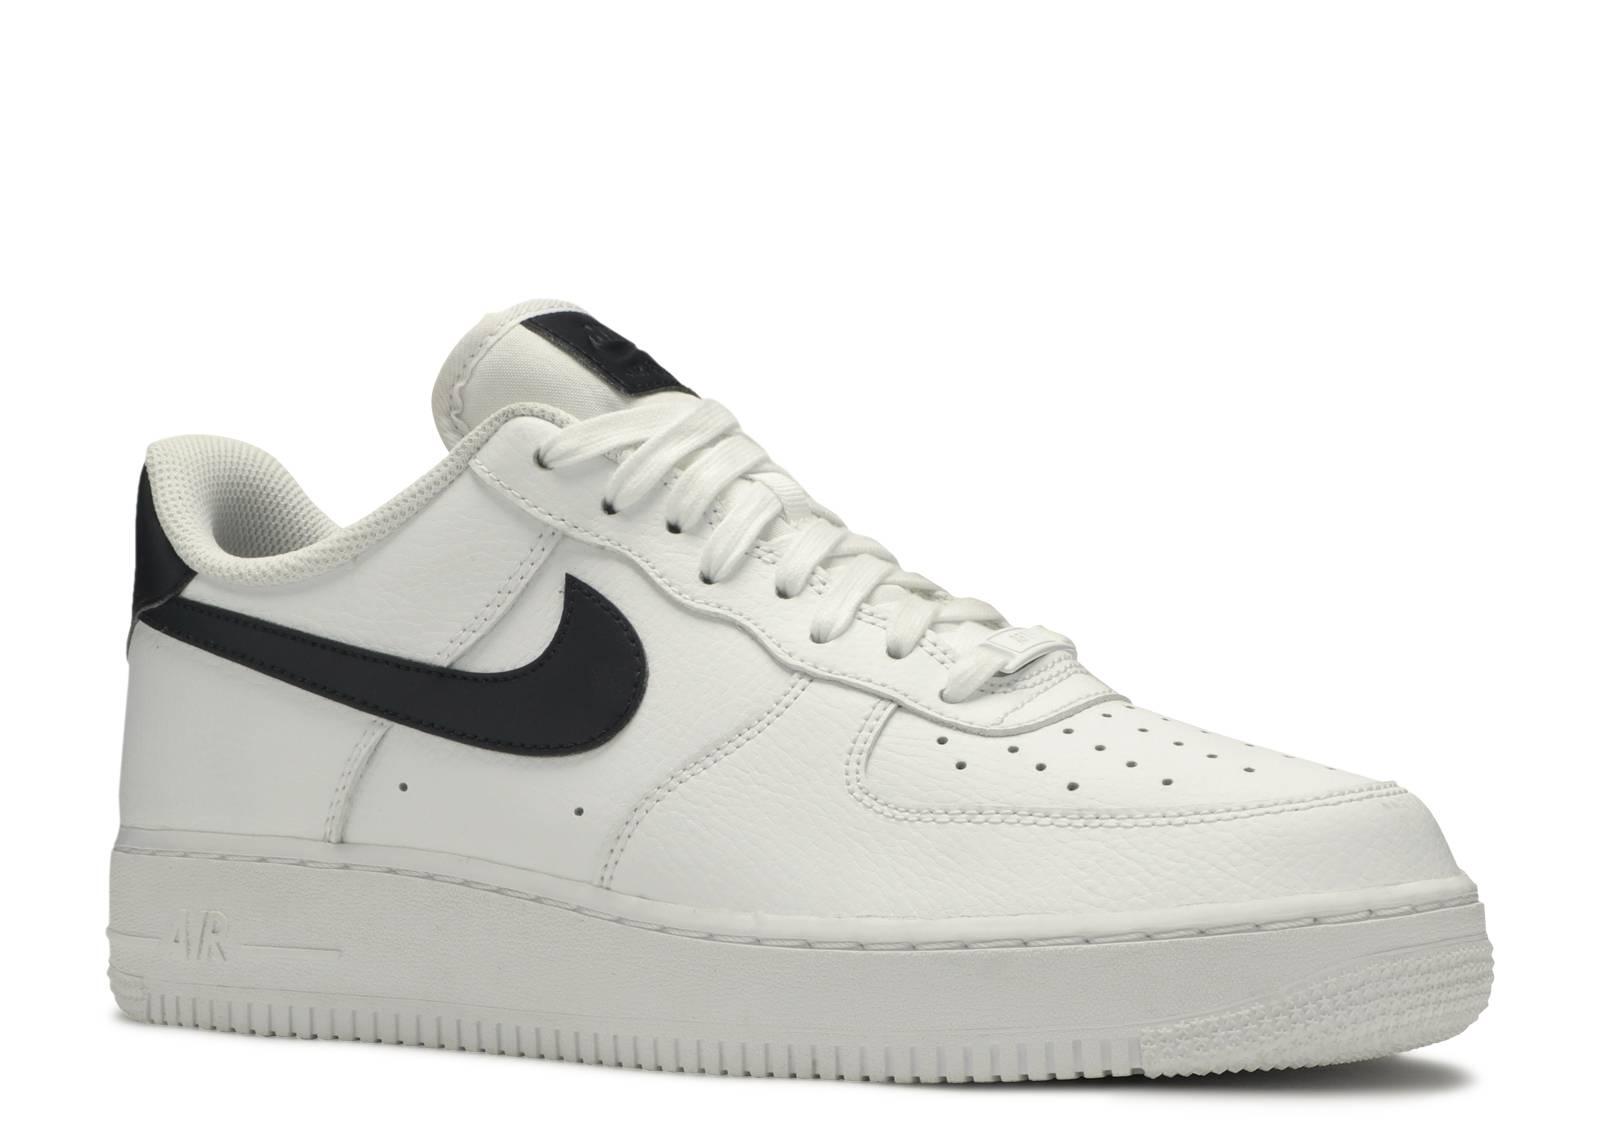 Nike Air Force 1' 07 Shoe in White - Lyst